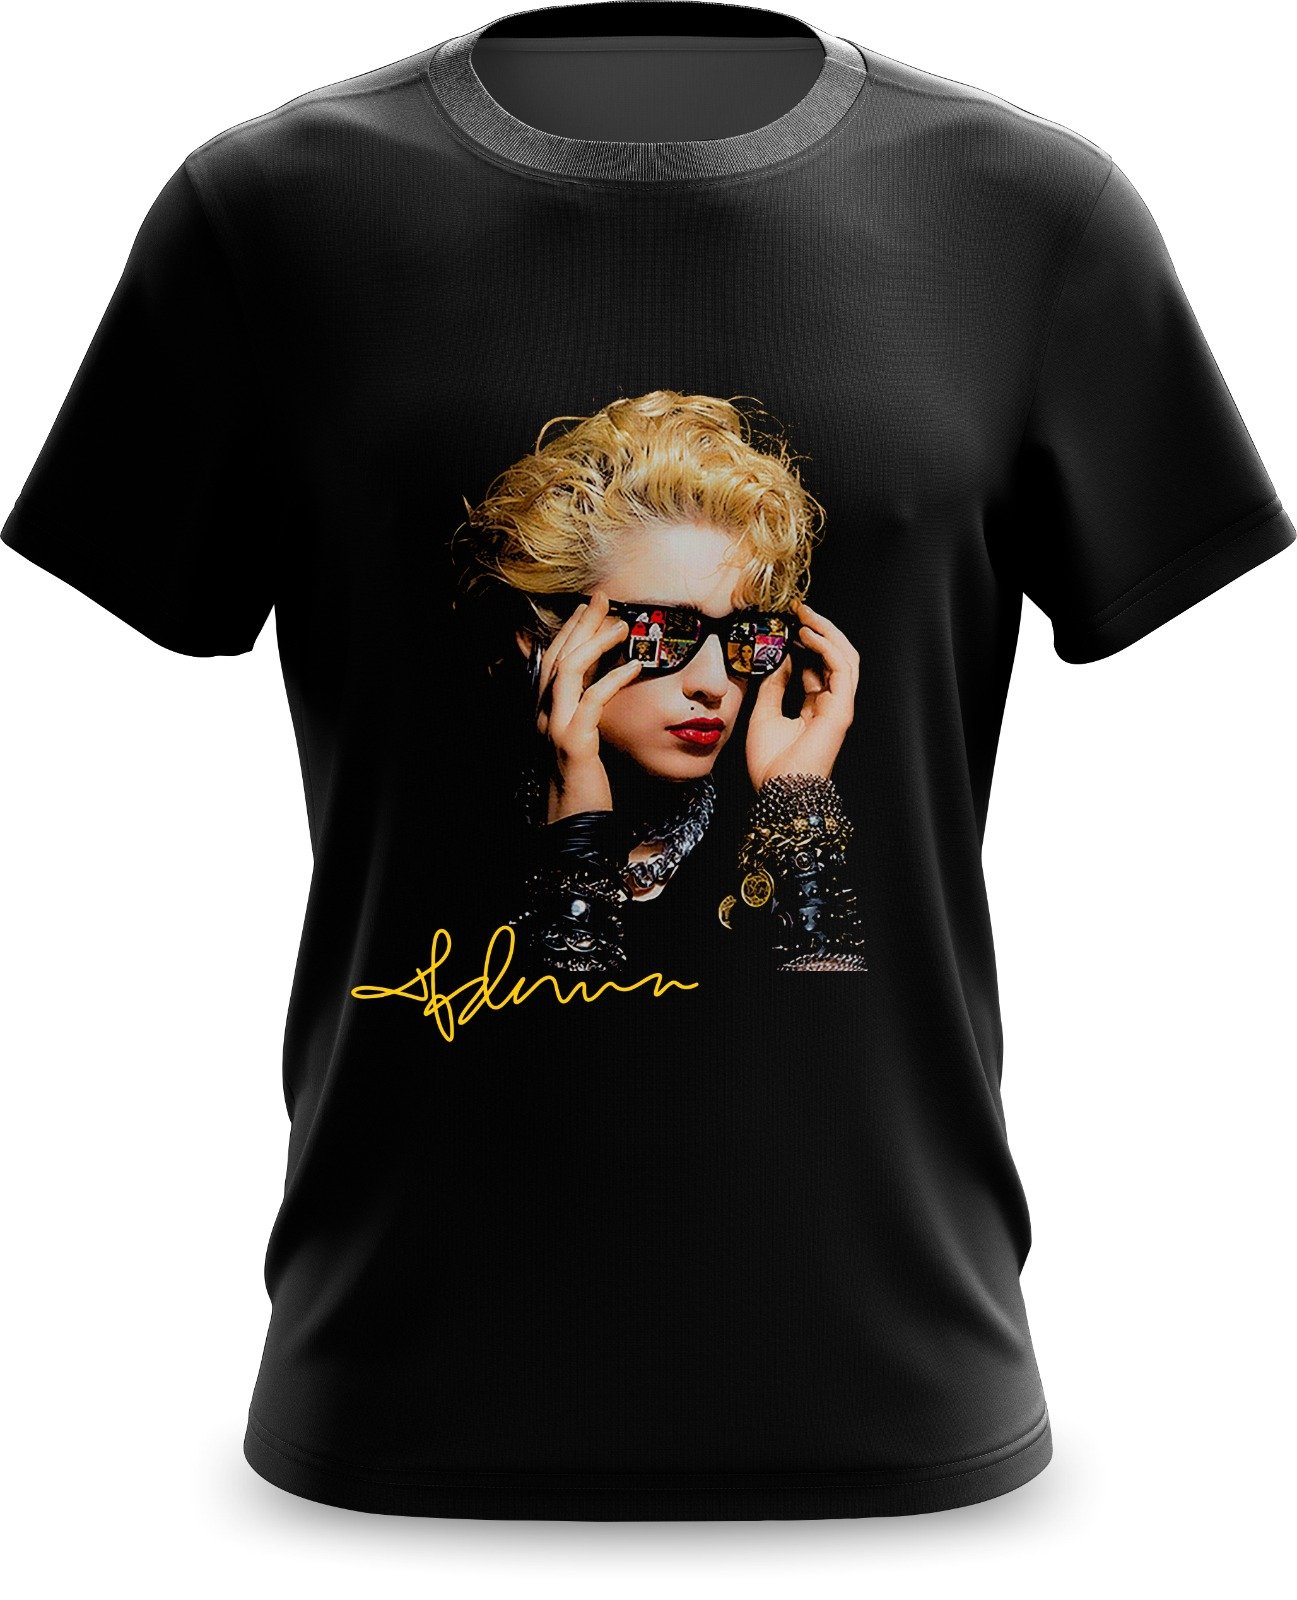 Images in high resolution for T-Shirts - The Celebration Tour - Madonna ...